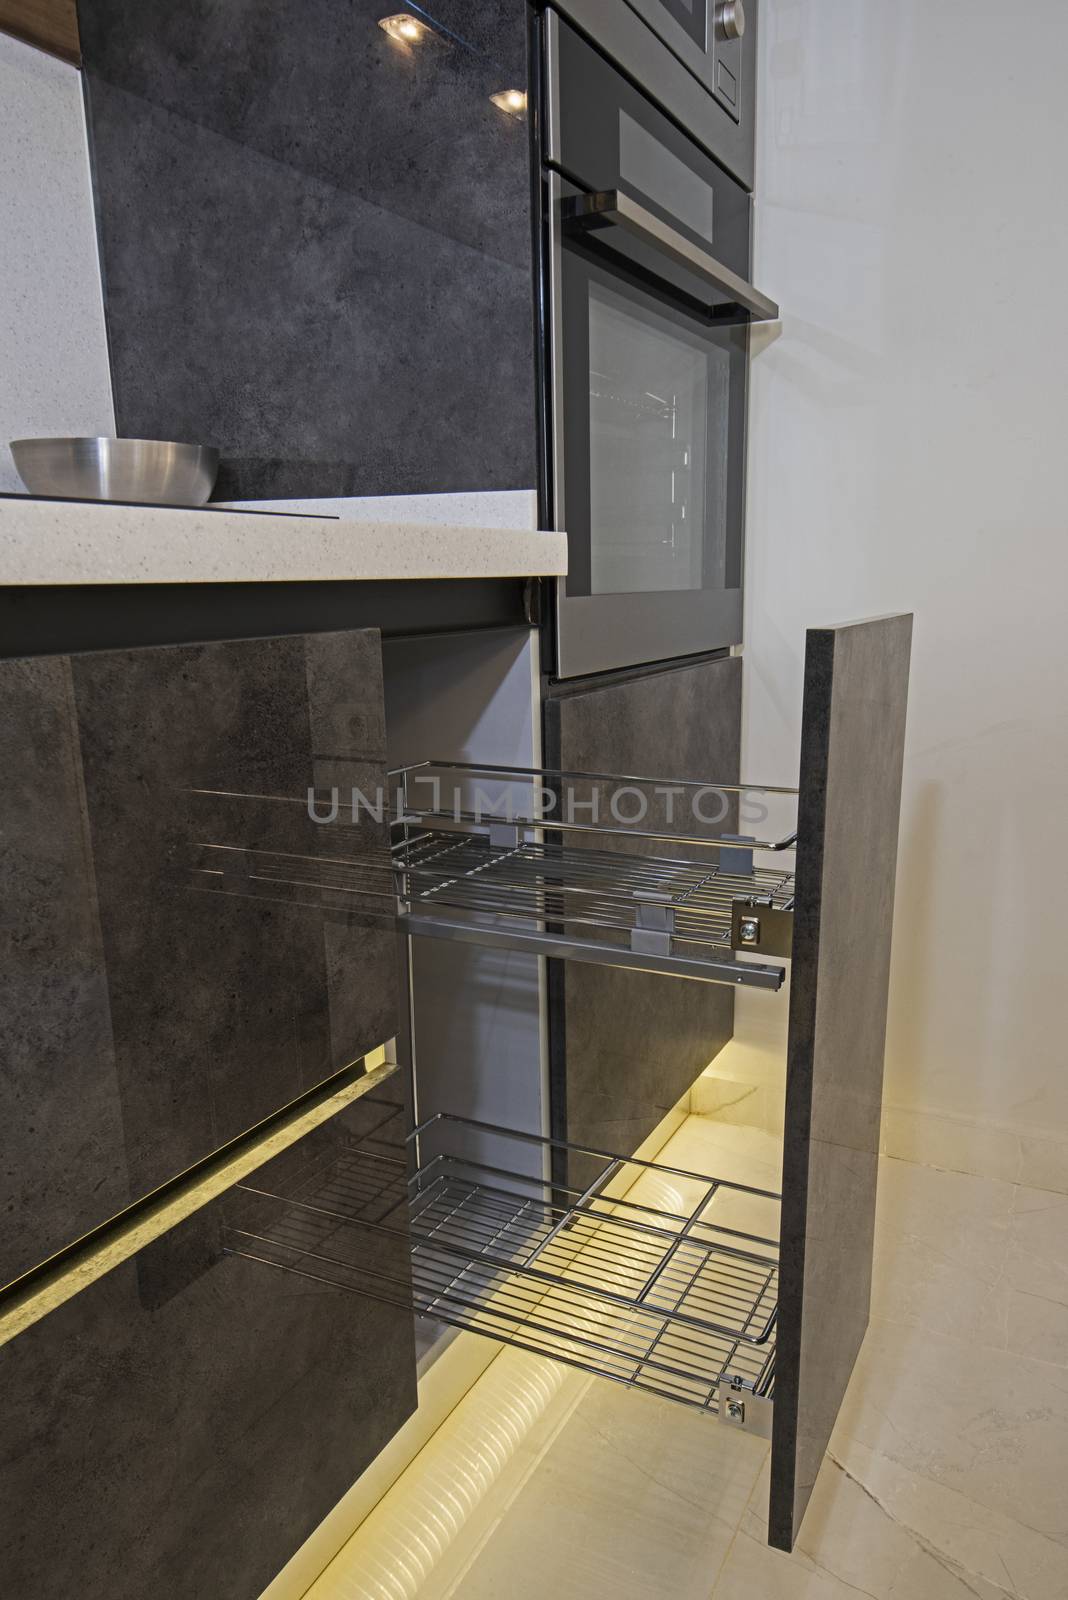 Interior design decor of kitchen in luxury apartment showing closeup detail of sliding cupboard with shelves